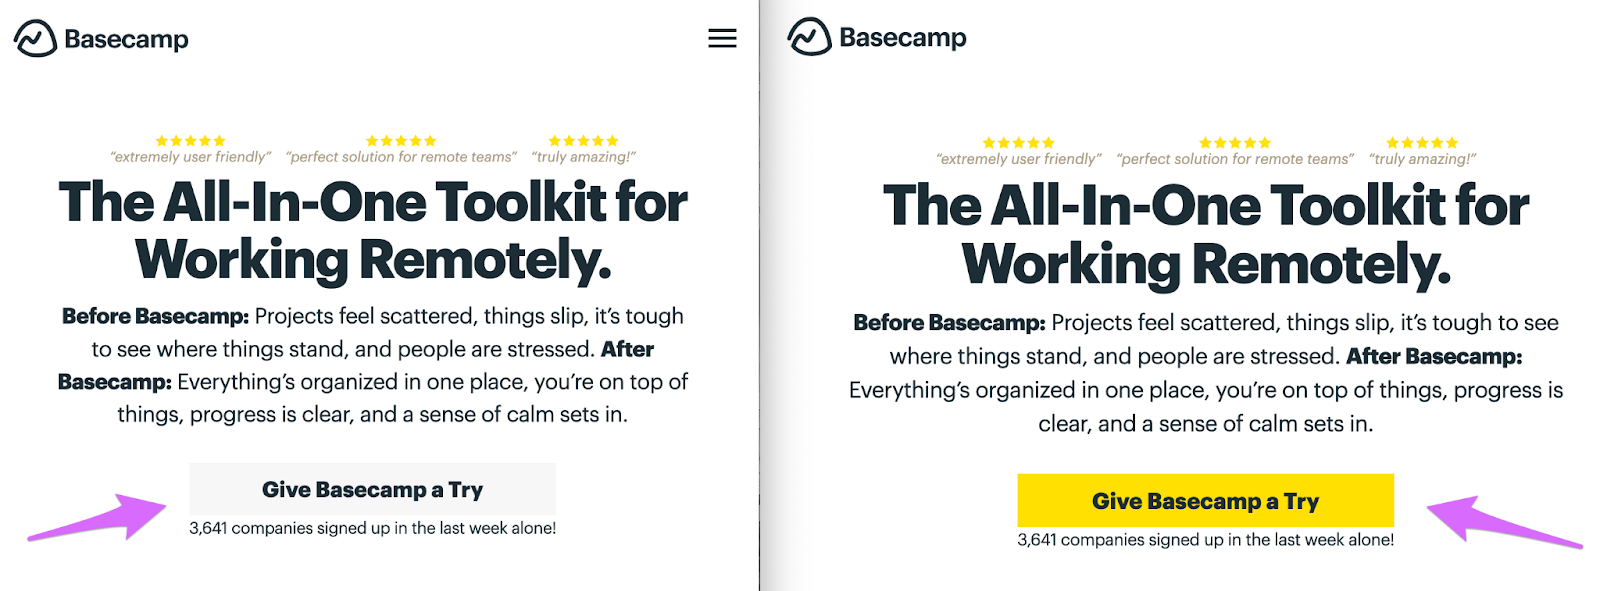 basecamp cta button one version is colored yellow the other is white